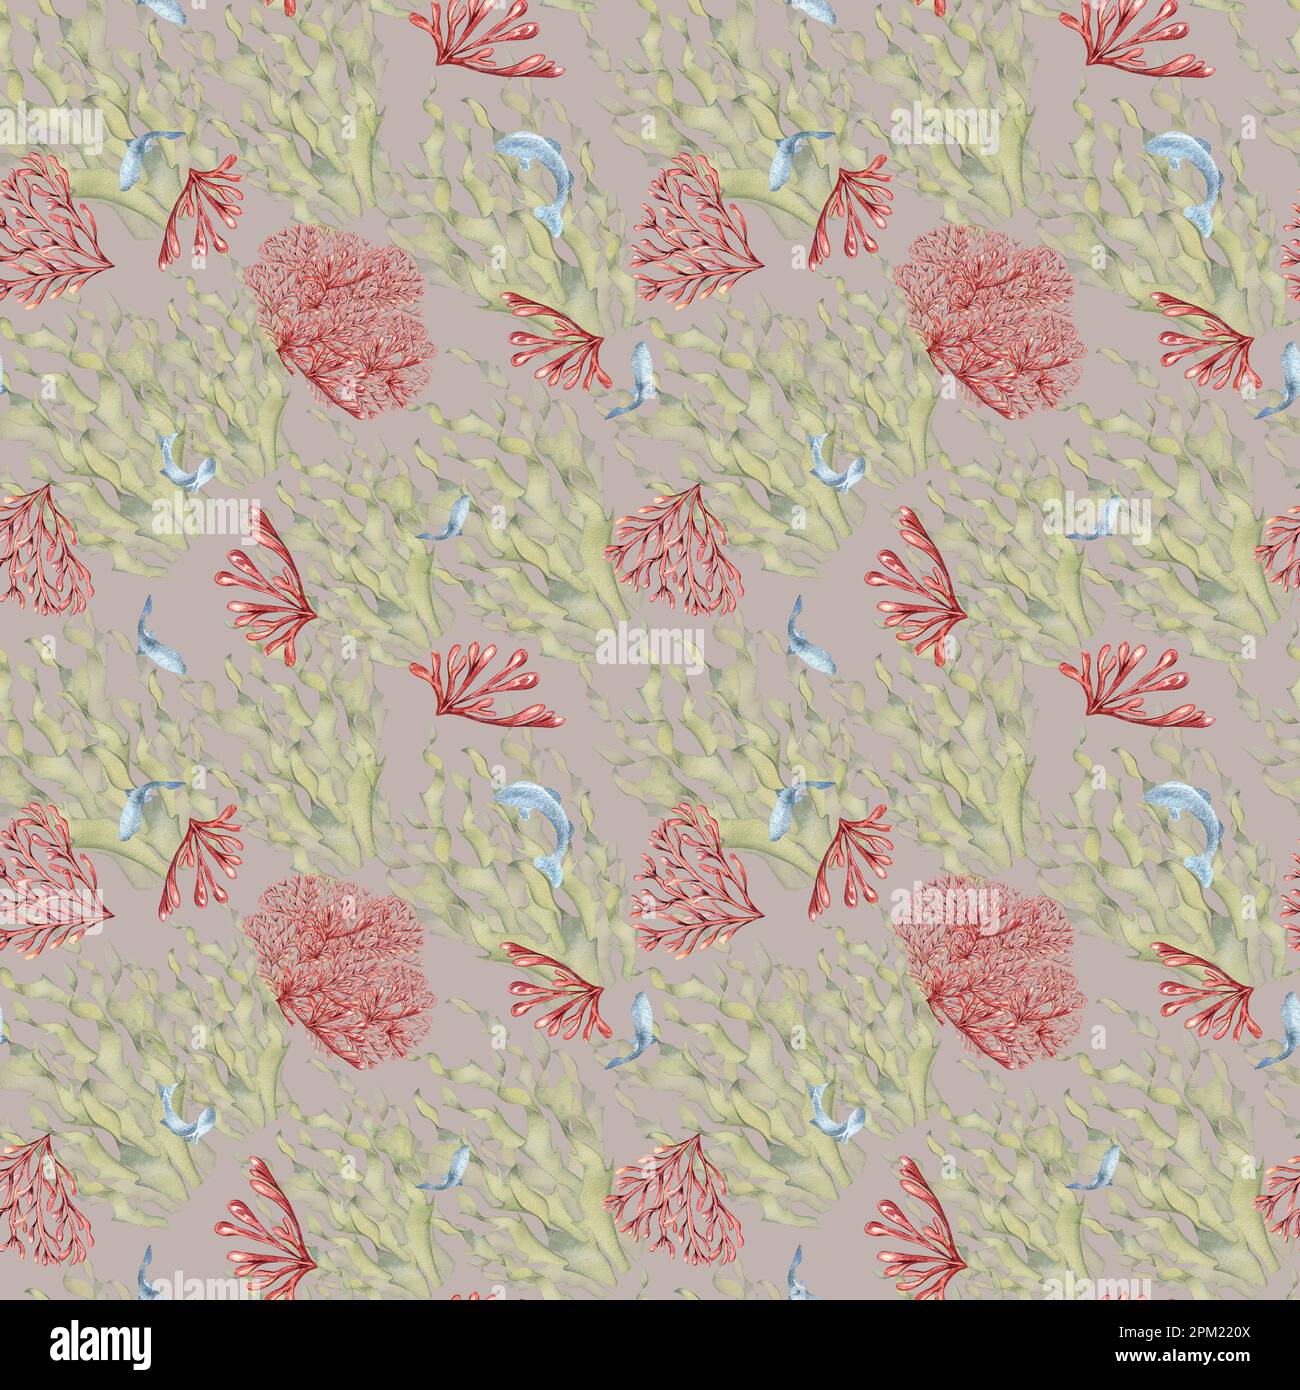 Seamless pattern of laminaria and coral watercolor isolated on pink background. Pink agar agar, sea plants and fish hand drawn. Design element for pac Stock Photo